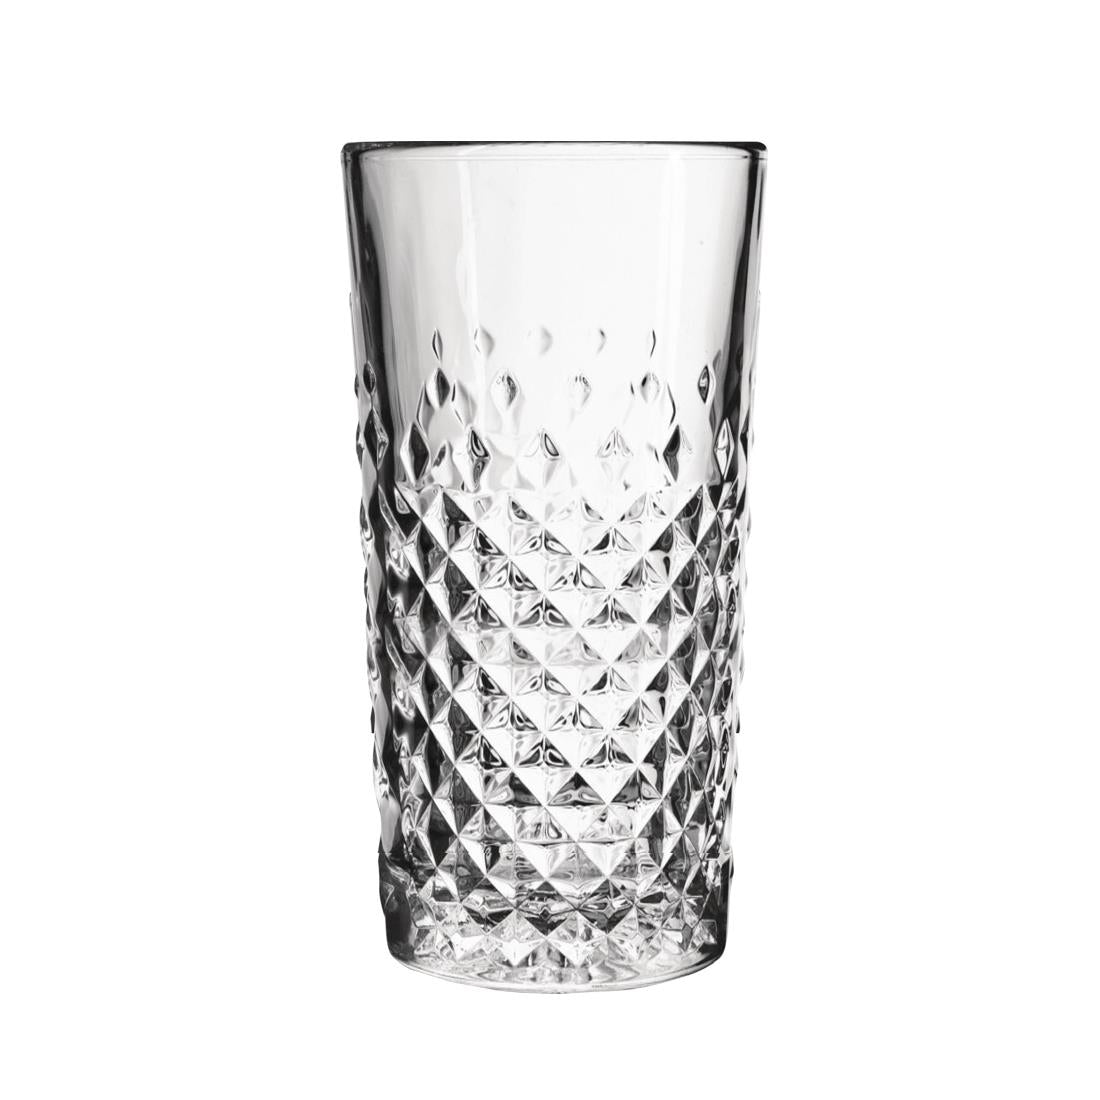 DX733 Onis Carats Beverage Glasses 400ml (Pack of 6)